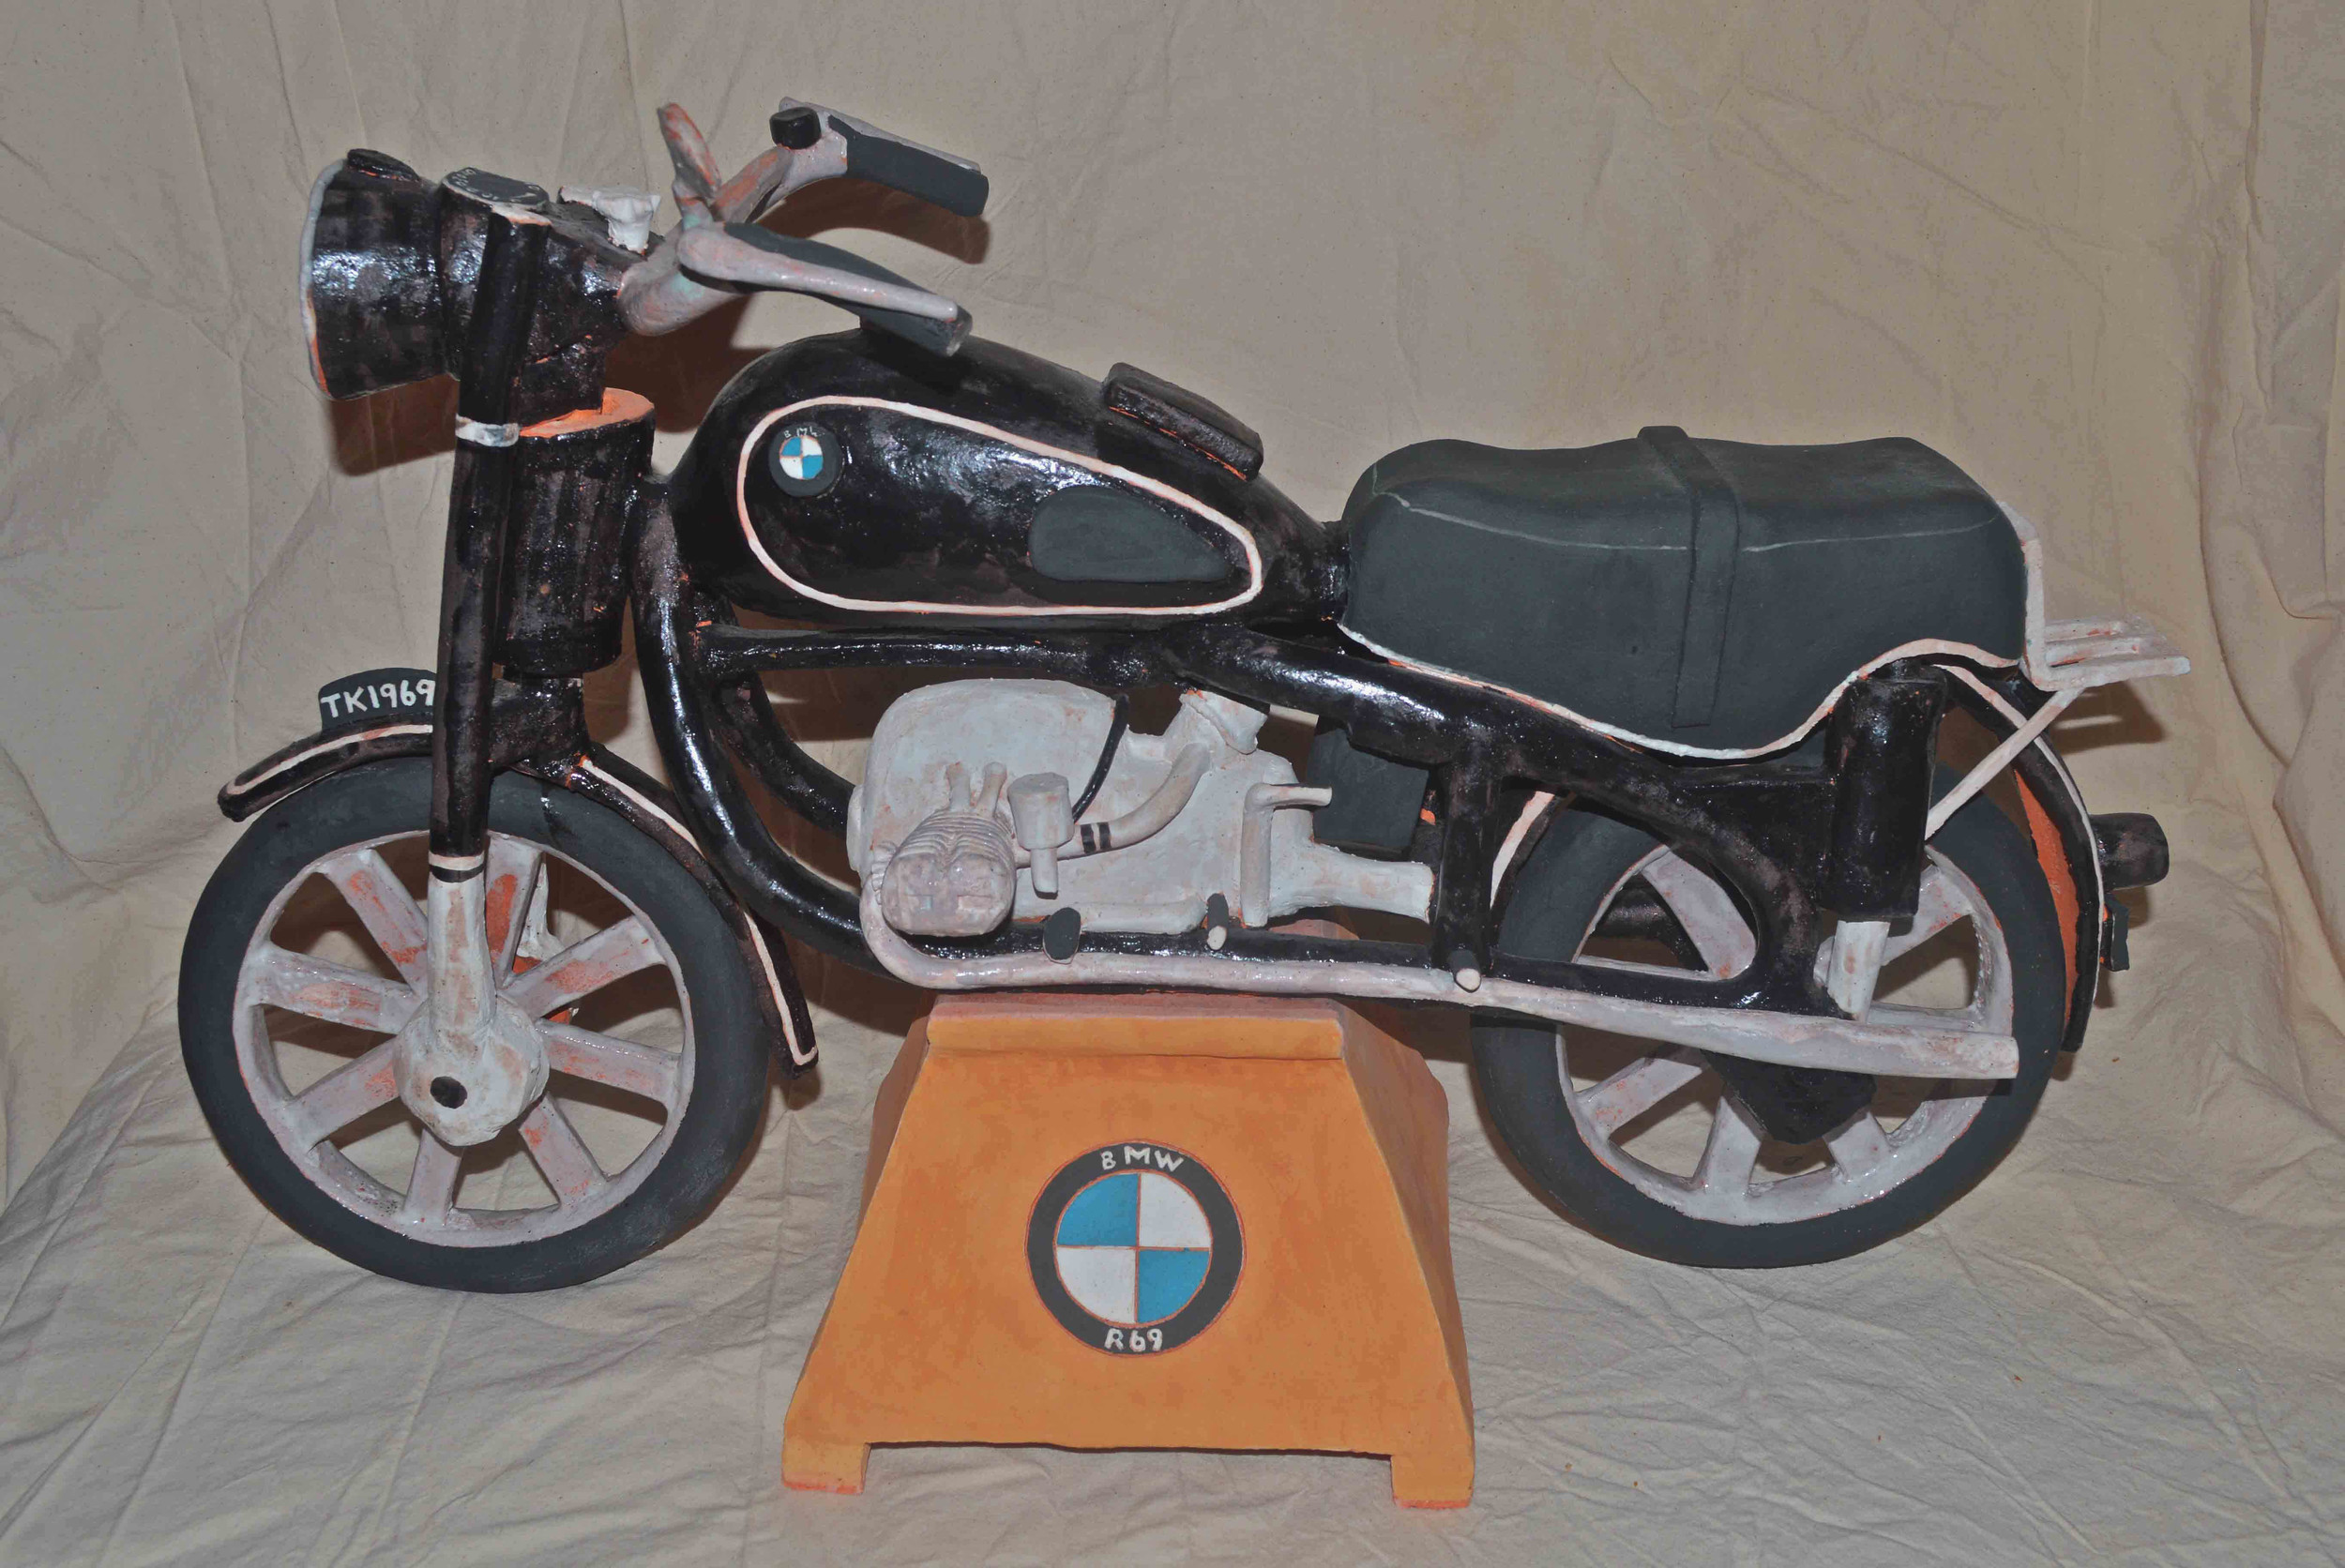  1969 BMW R69. A dedication to my cousin Ted who passed away way too soon. Stoneware clay fired to cone 2 reduction 